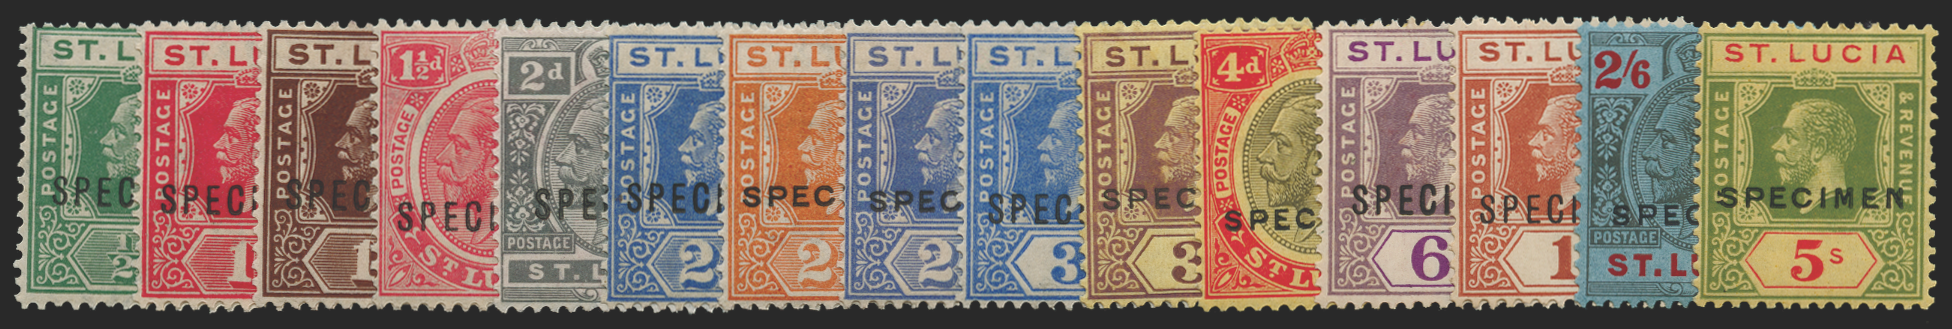 ST LUCIA 1921-30 set of 15 to 5s SPECIMENS, SG91s/105s